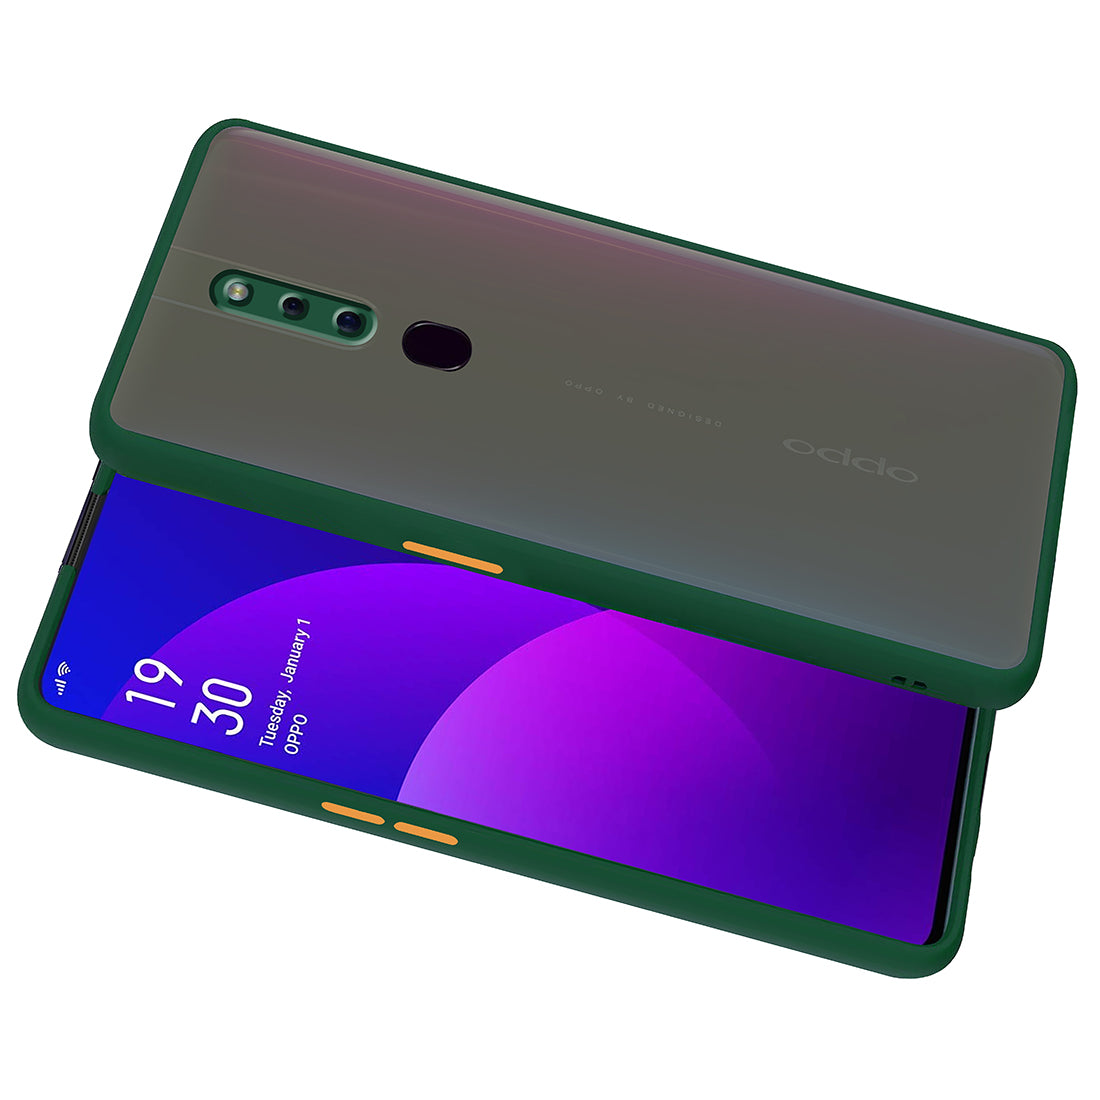 Smoke Back Case Cover for Oppo F11 Pro